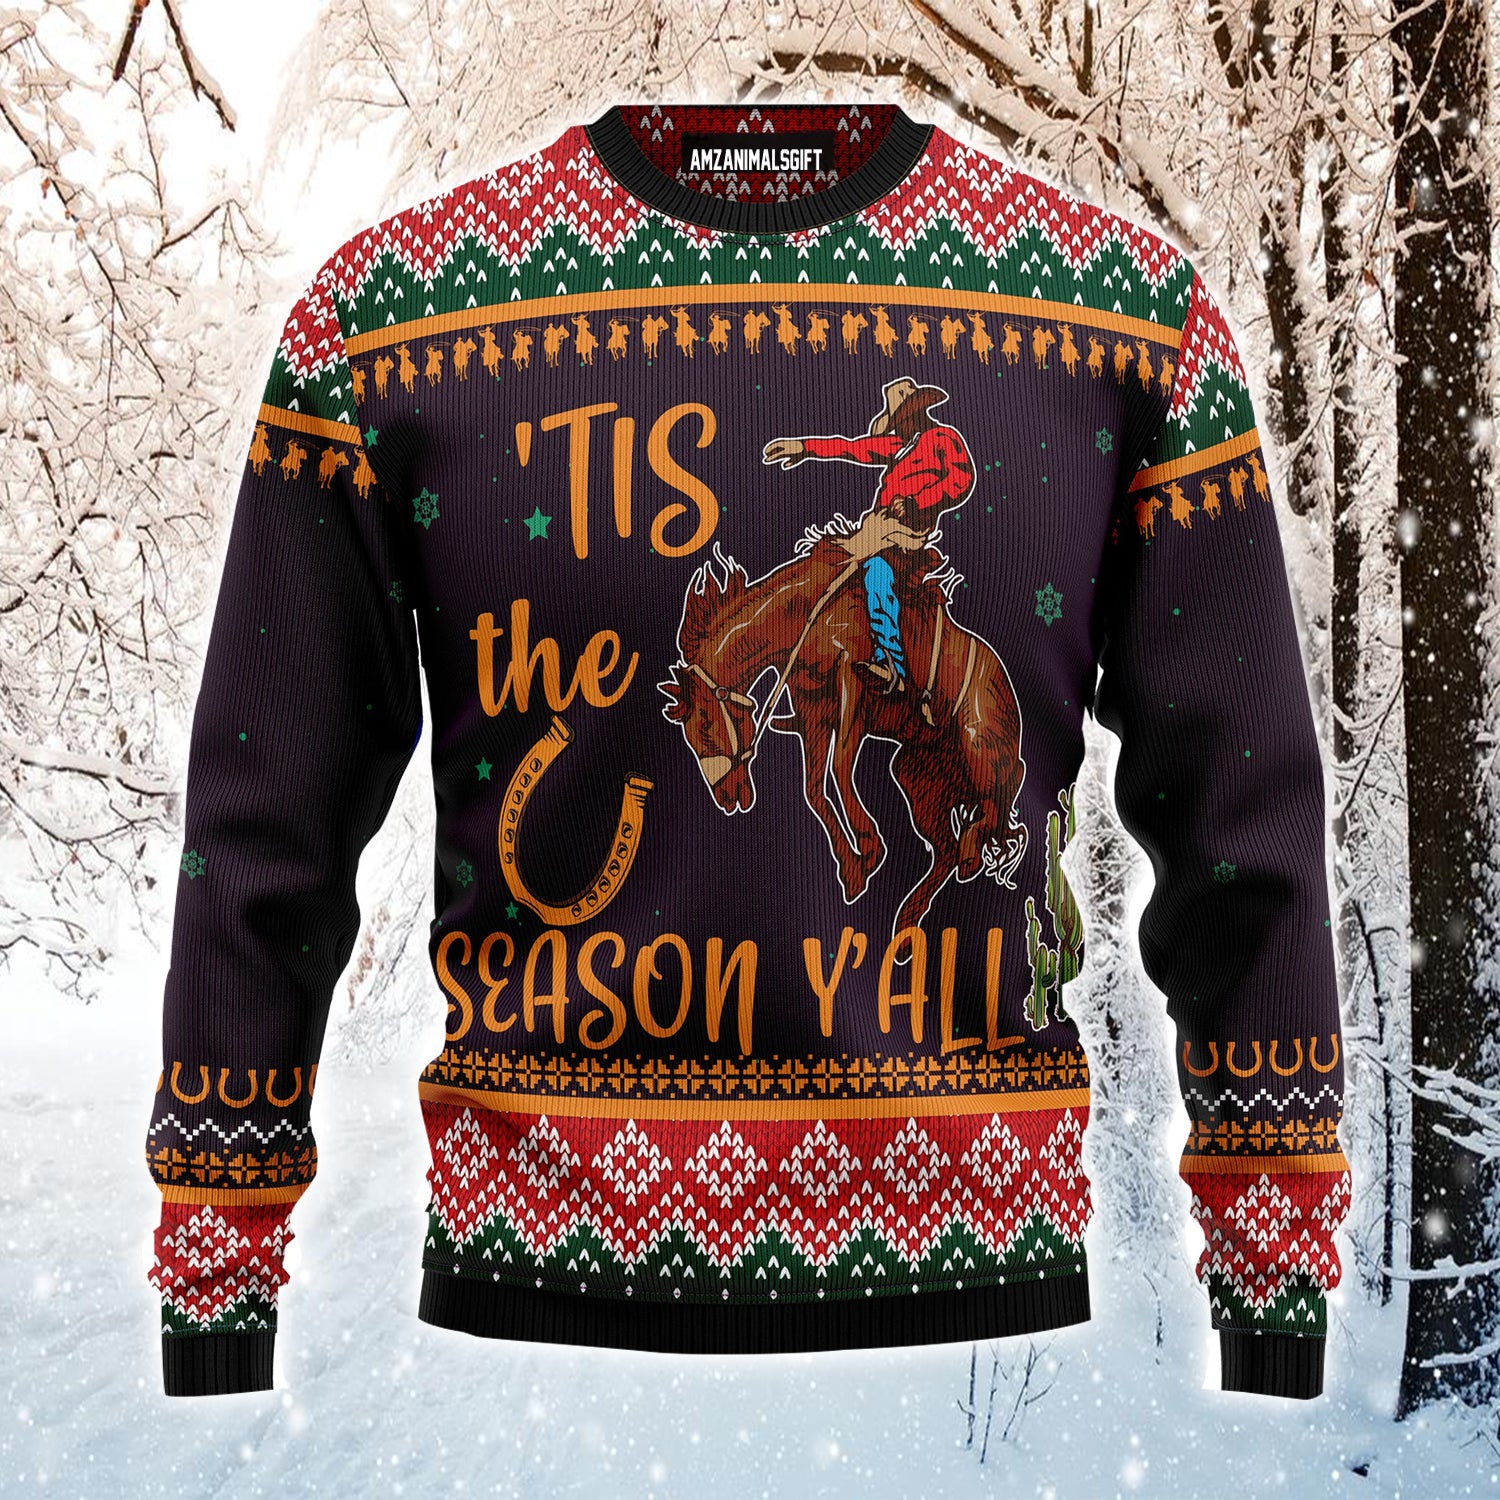 Cowboy Ugly Christmas Sweater, Cowboy Season Christmas Pattern Ugly Sweater For Men & Women - Best Gift For Christmas, Friends, Cowboy